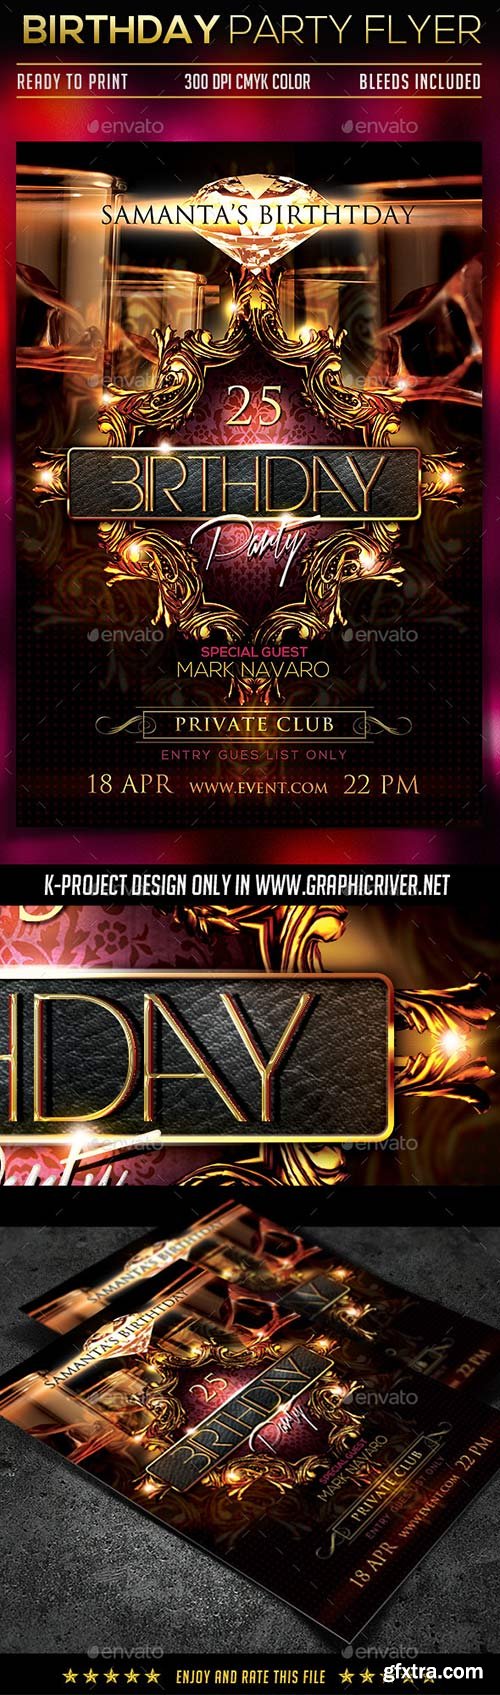 GraphicRiver - Birthday Party Flyer 10368721